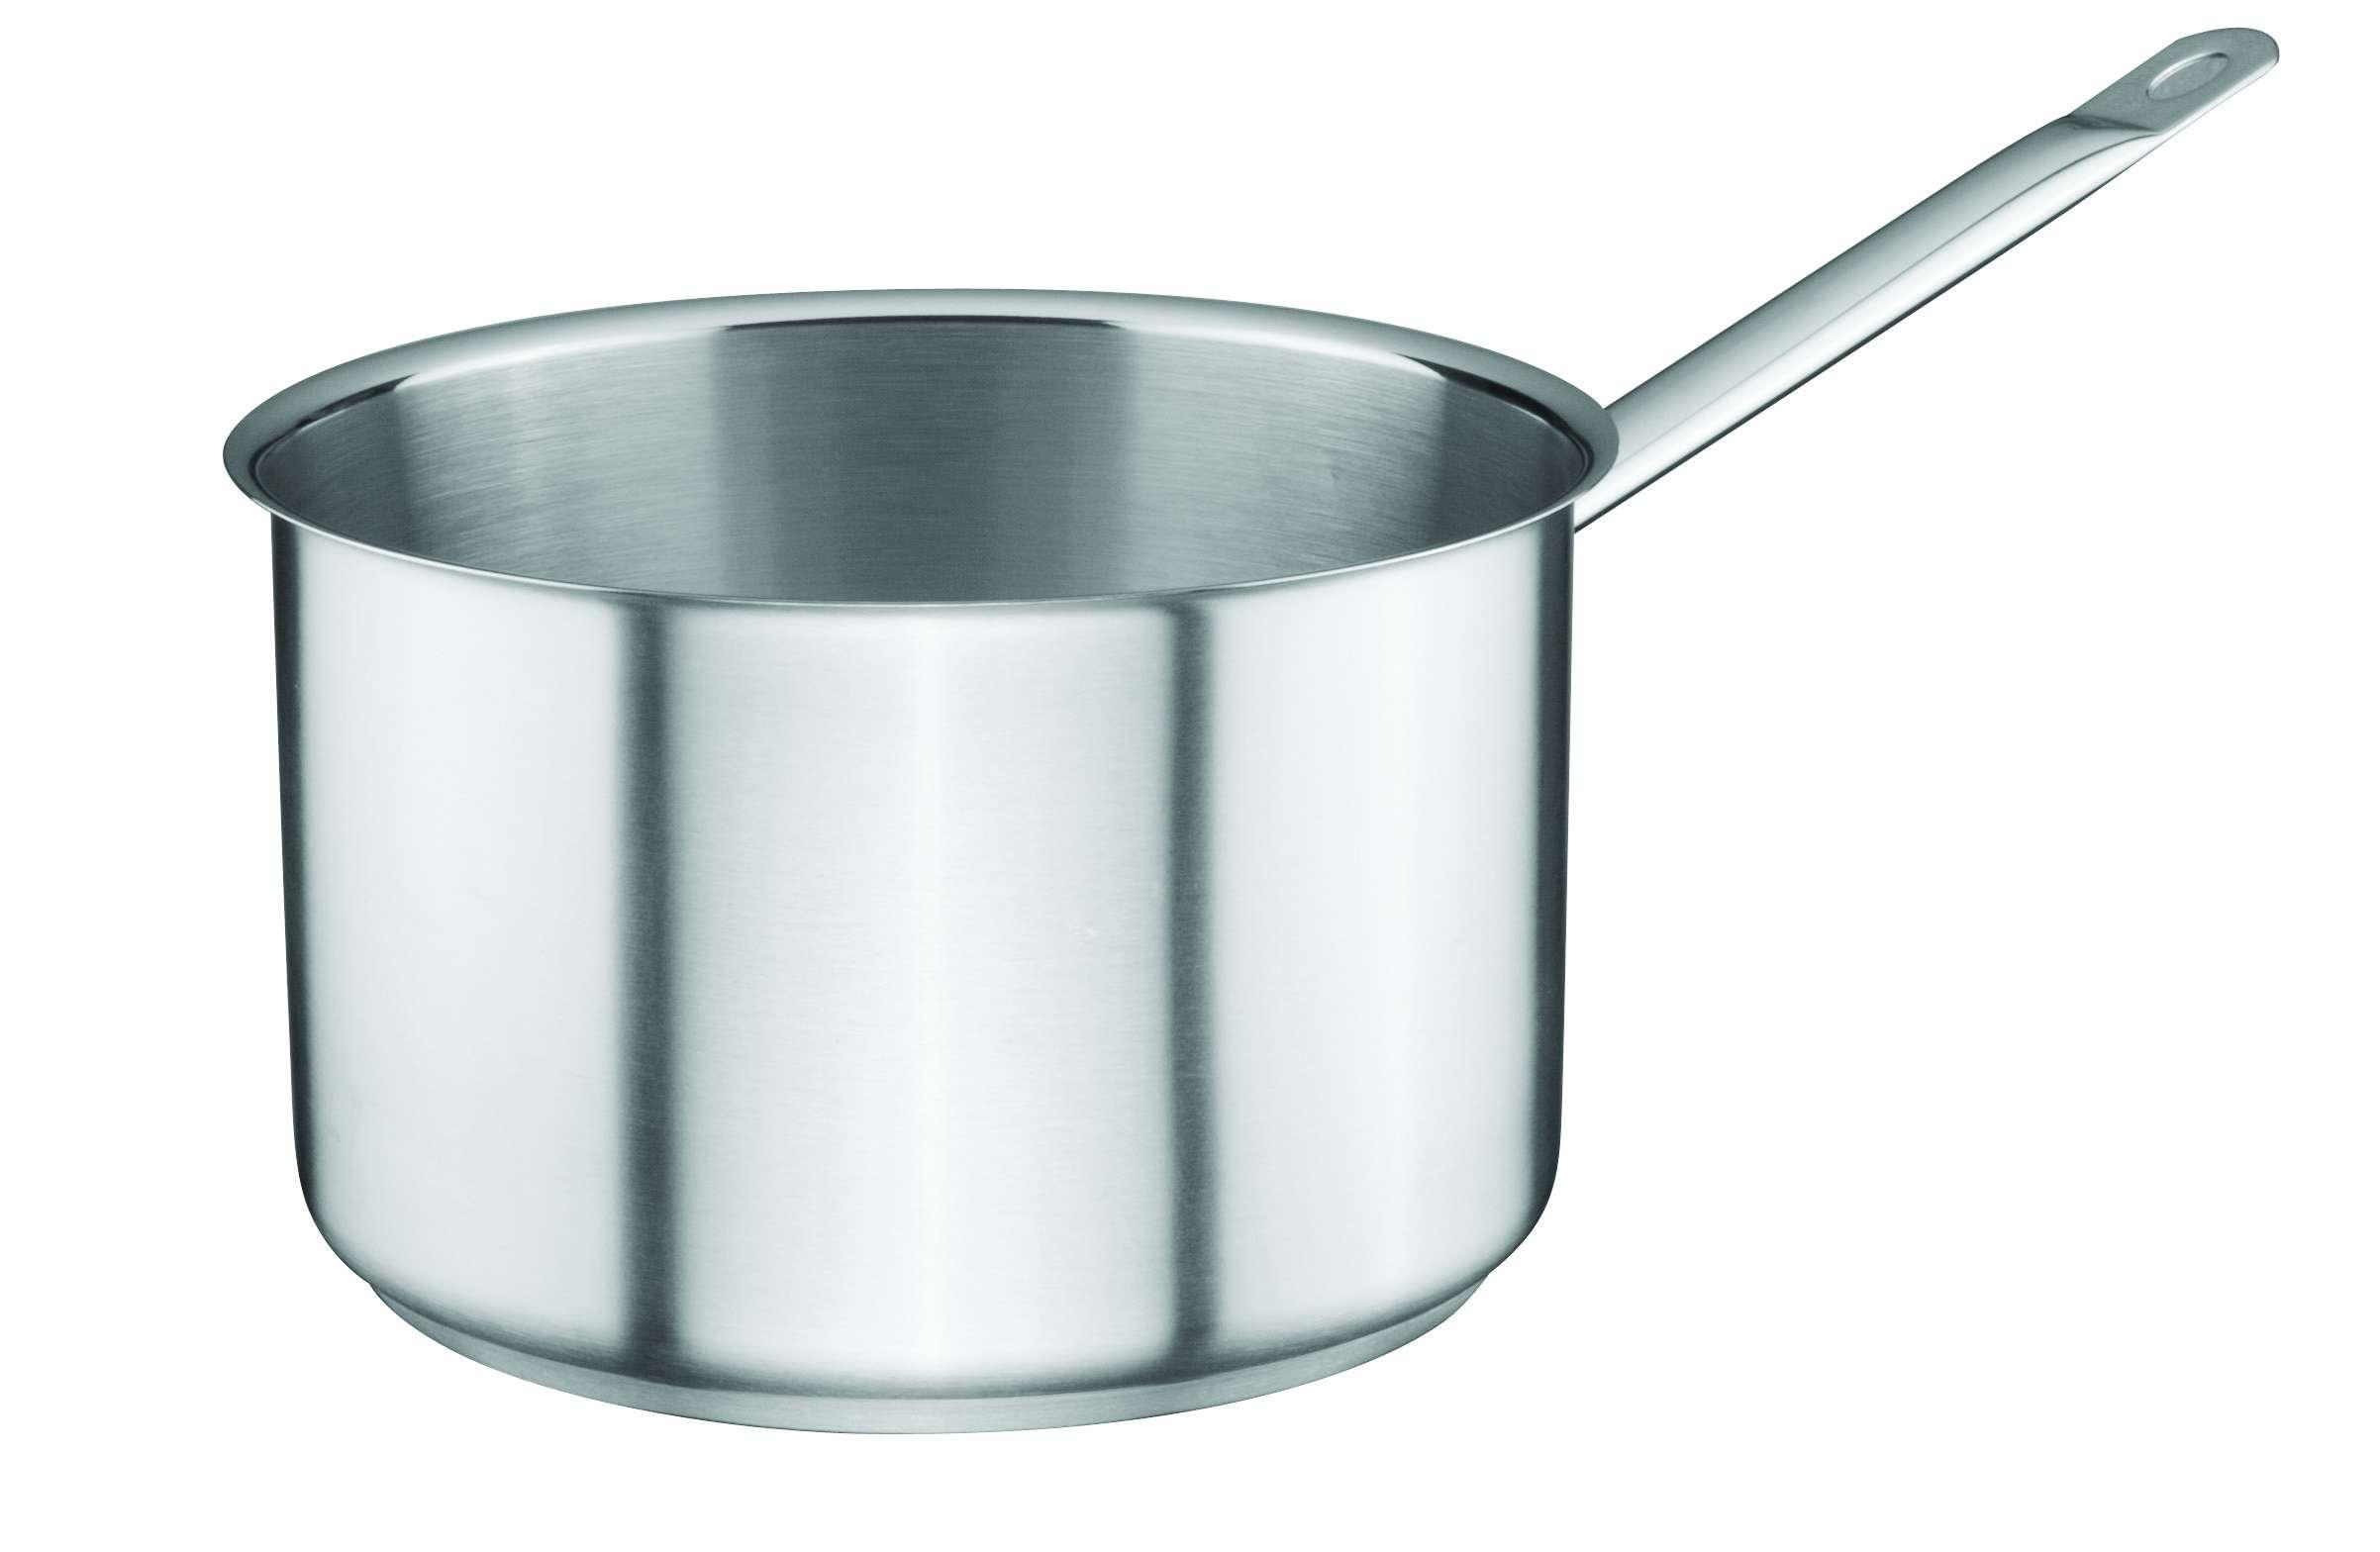 Ozti Stainless Steel Sauce Pan 16 cm x 11 cm Silver Stainless Steel